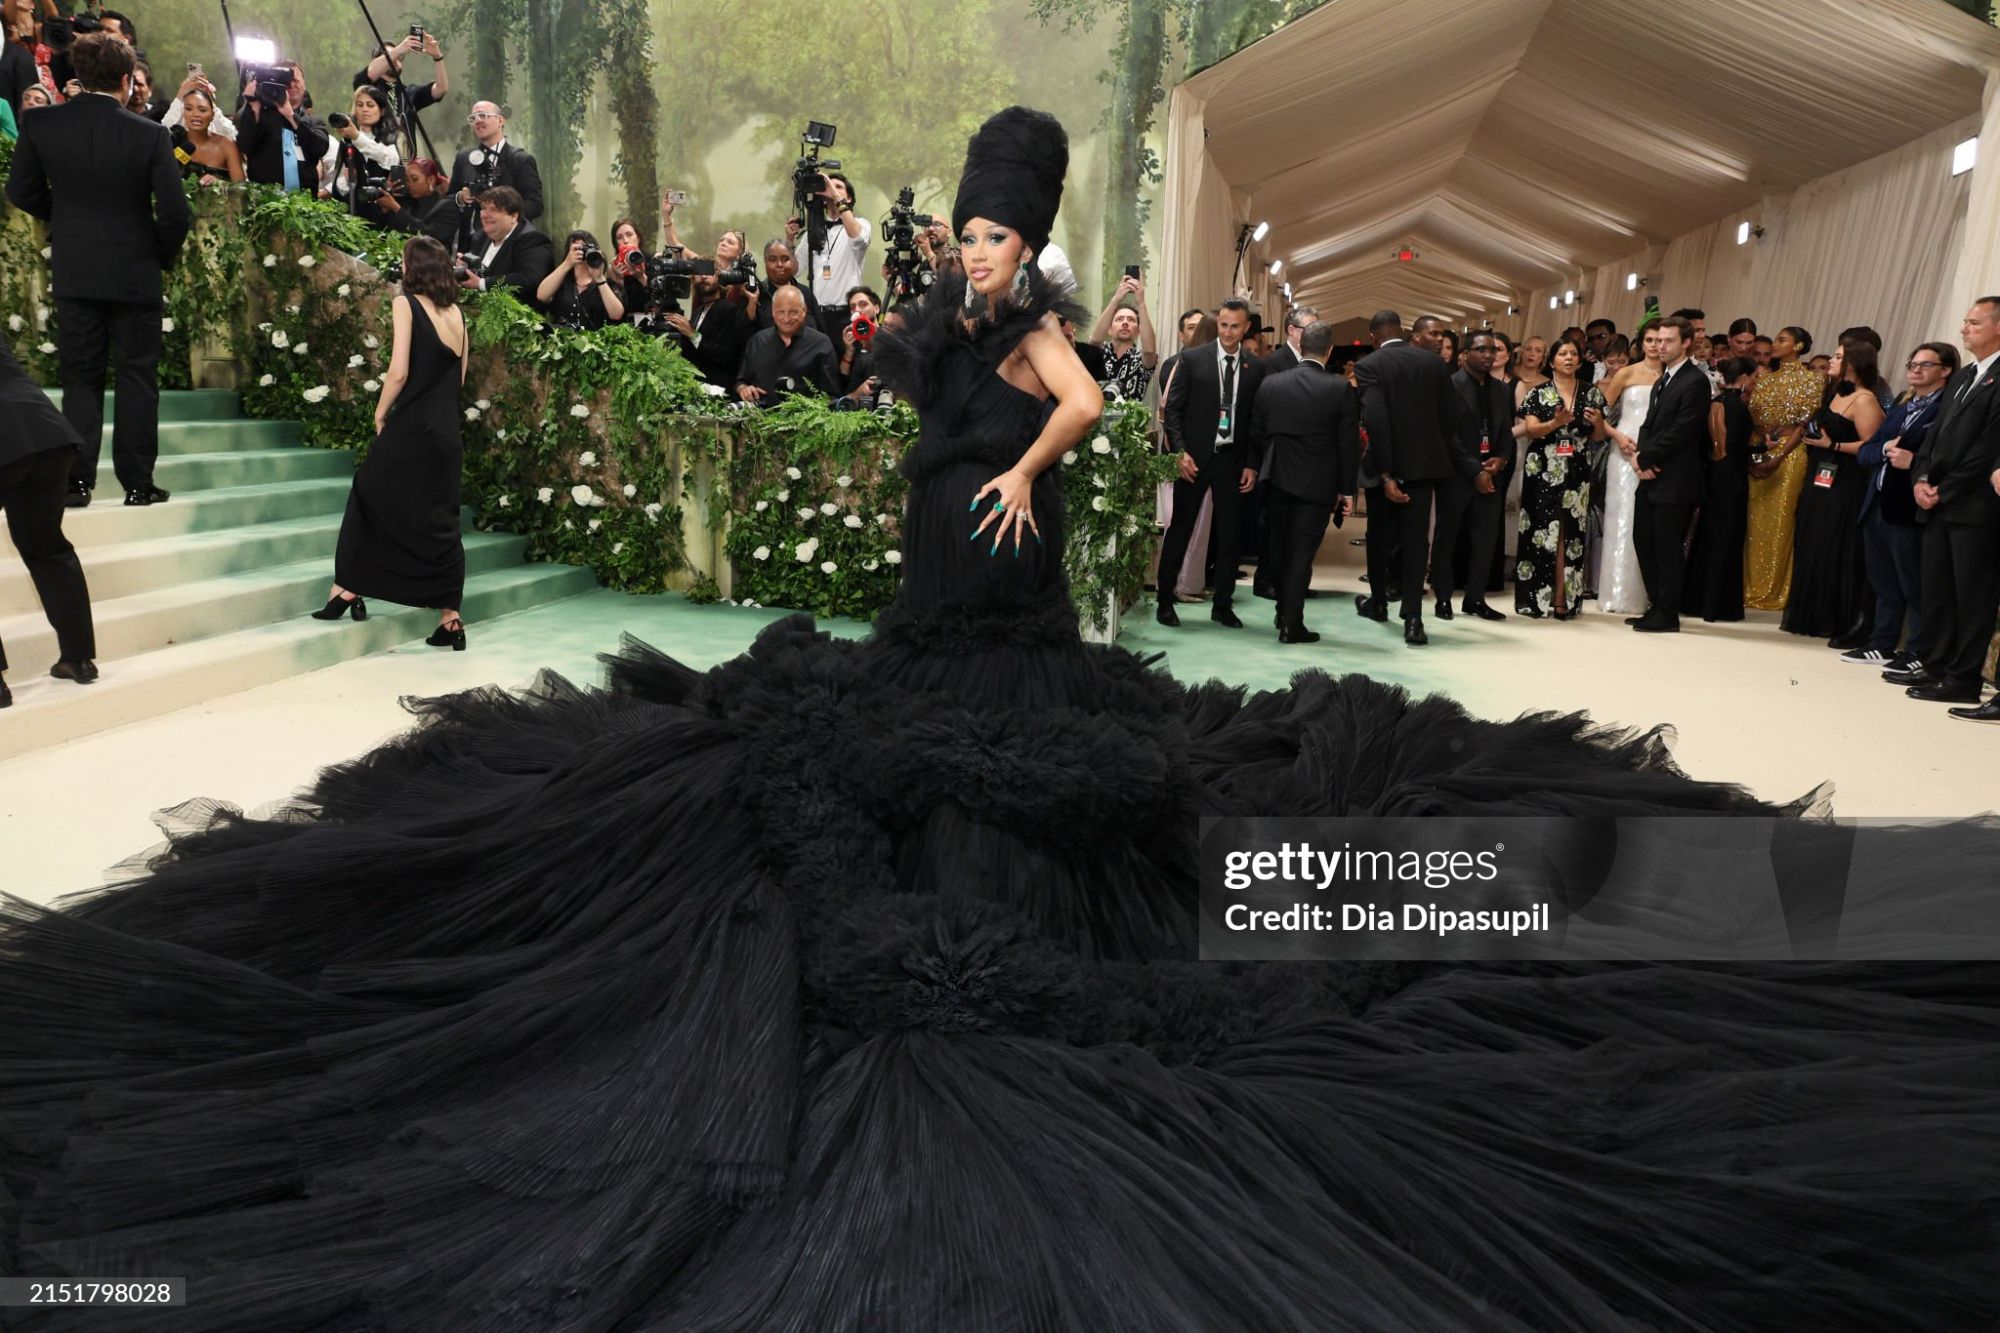 gettyimages-2151798028-2048x2048.jpg